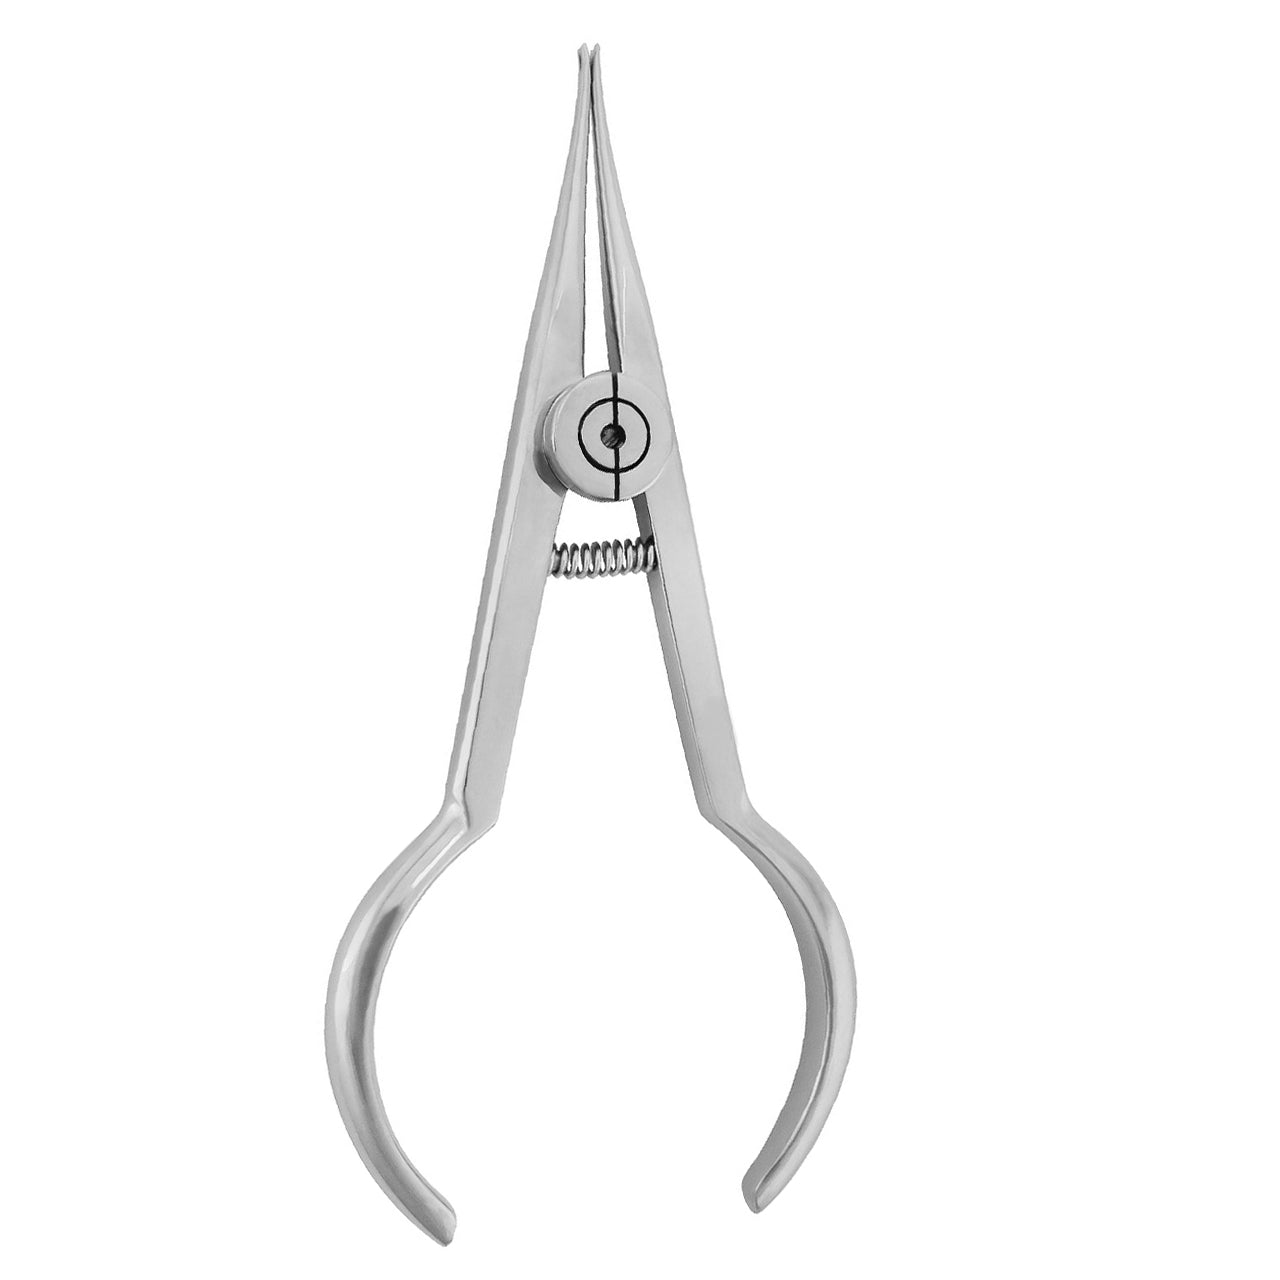 Coon Style Ligature Tying Pliers